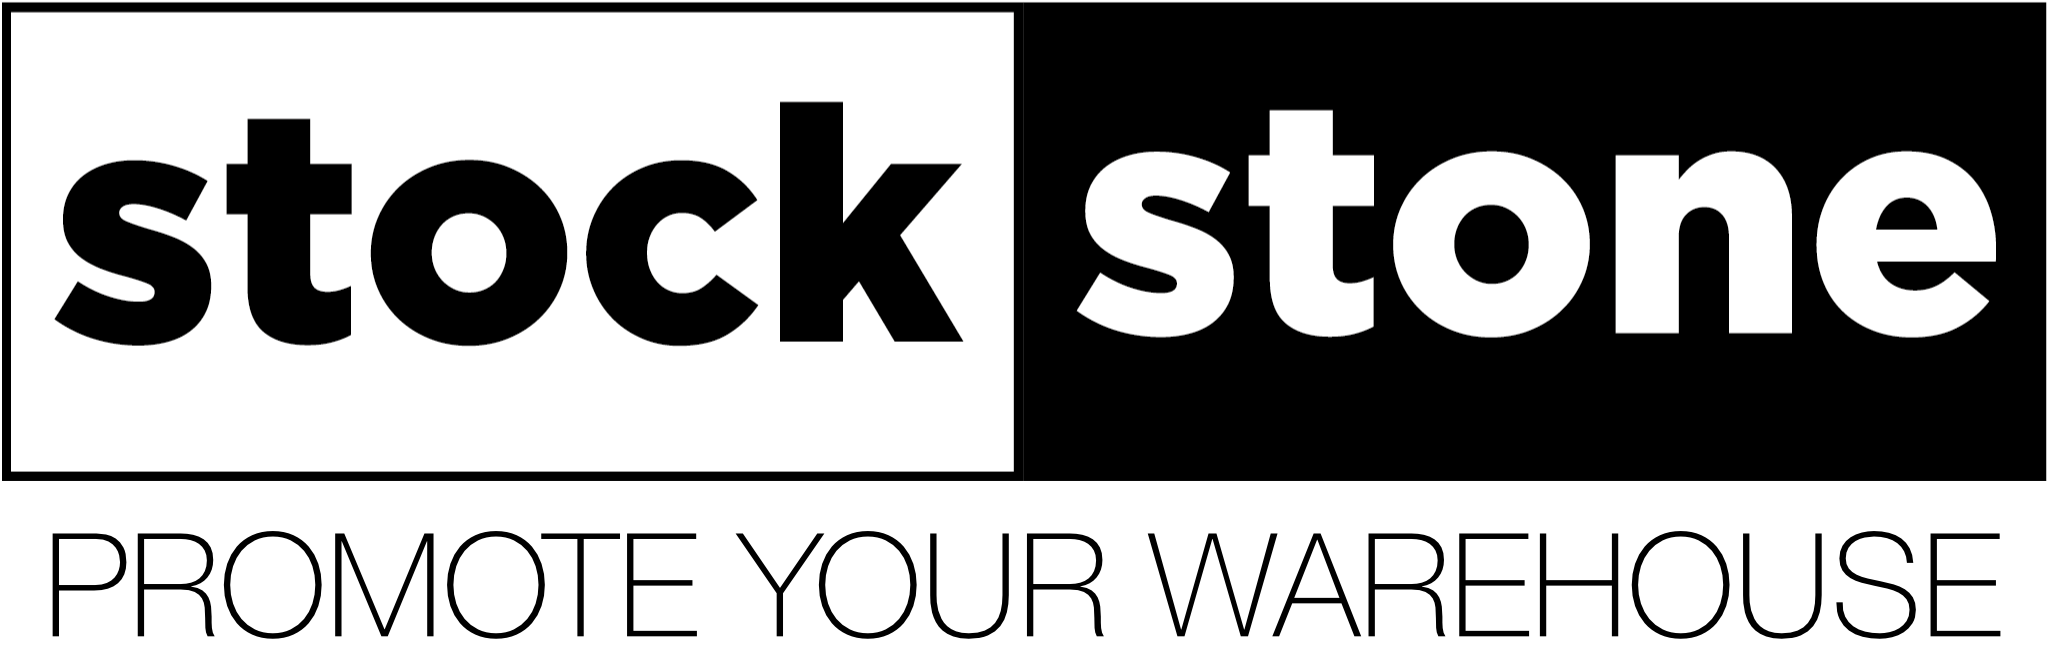 STOCK STONE: promote your warehouse